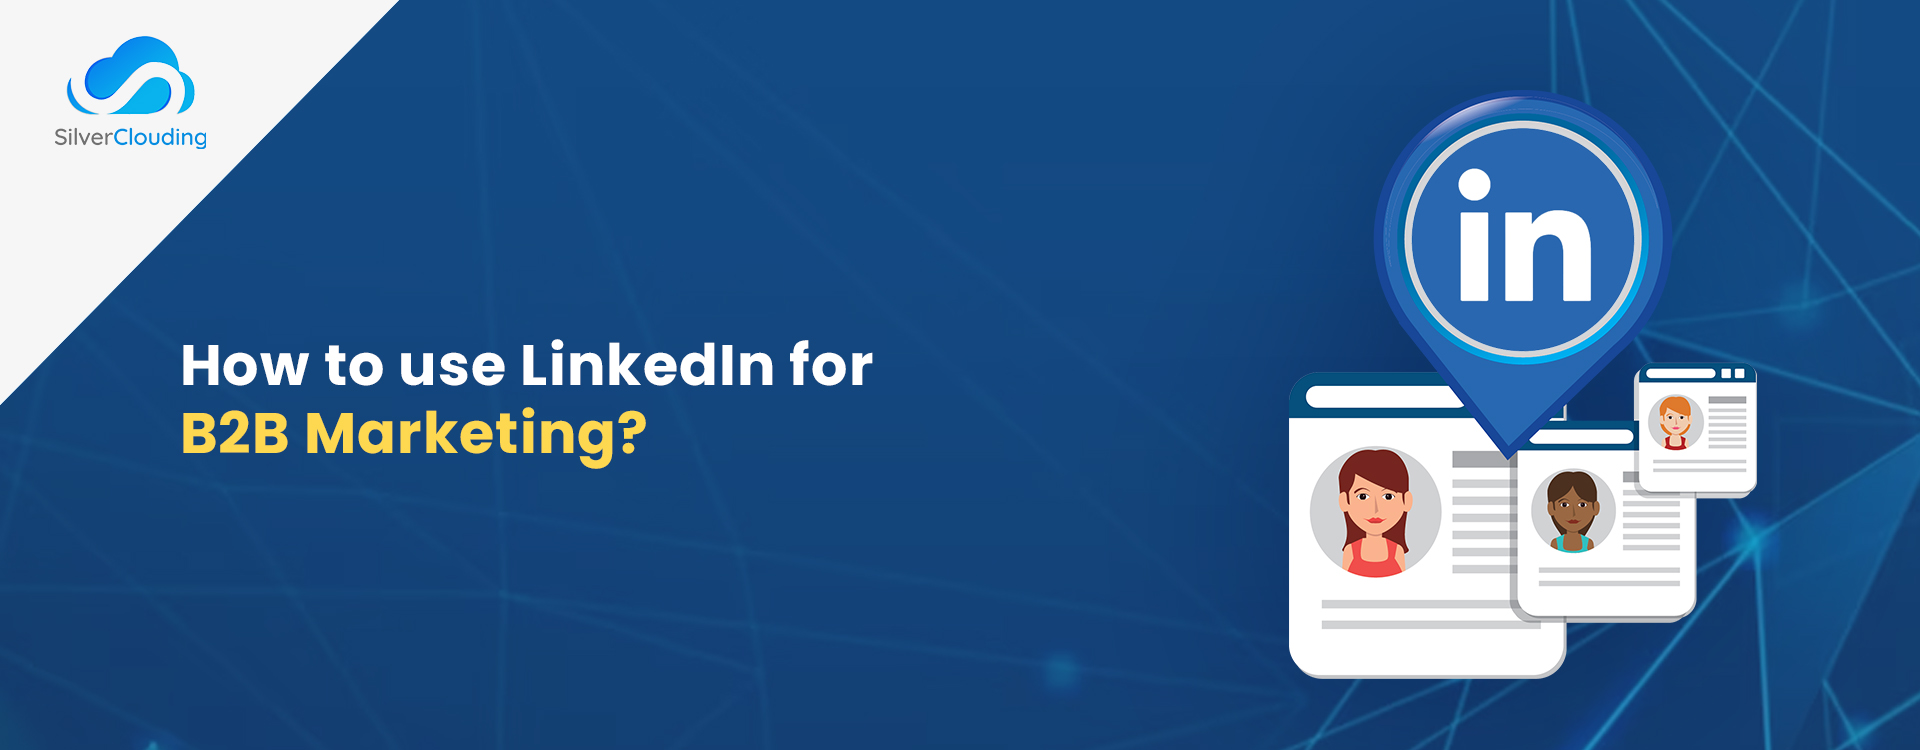 How to use LinkedIn for B2B Marketing?